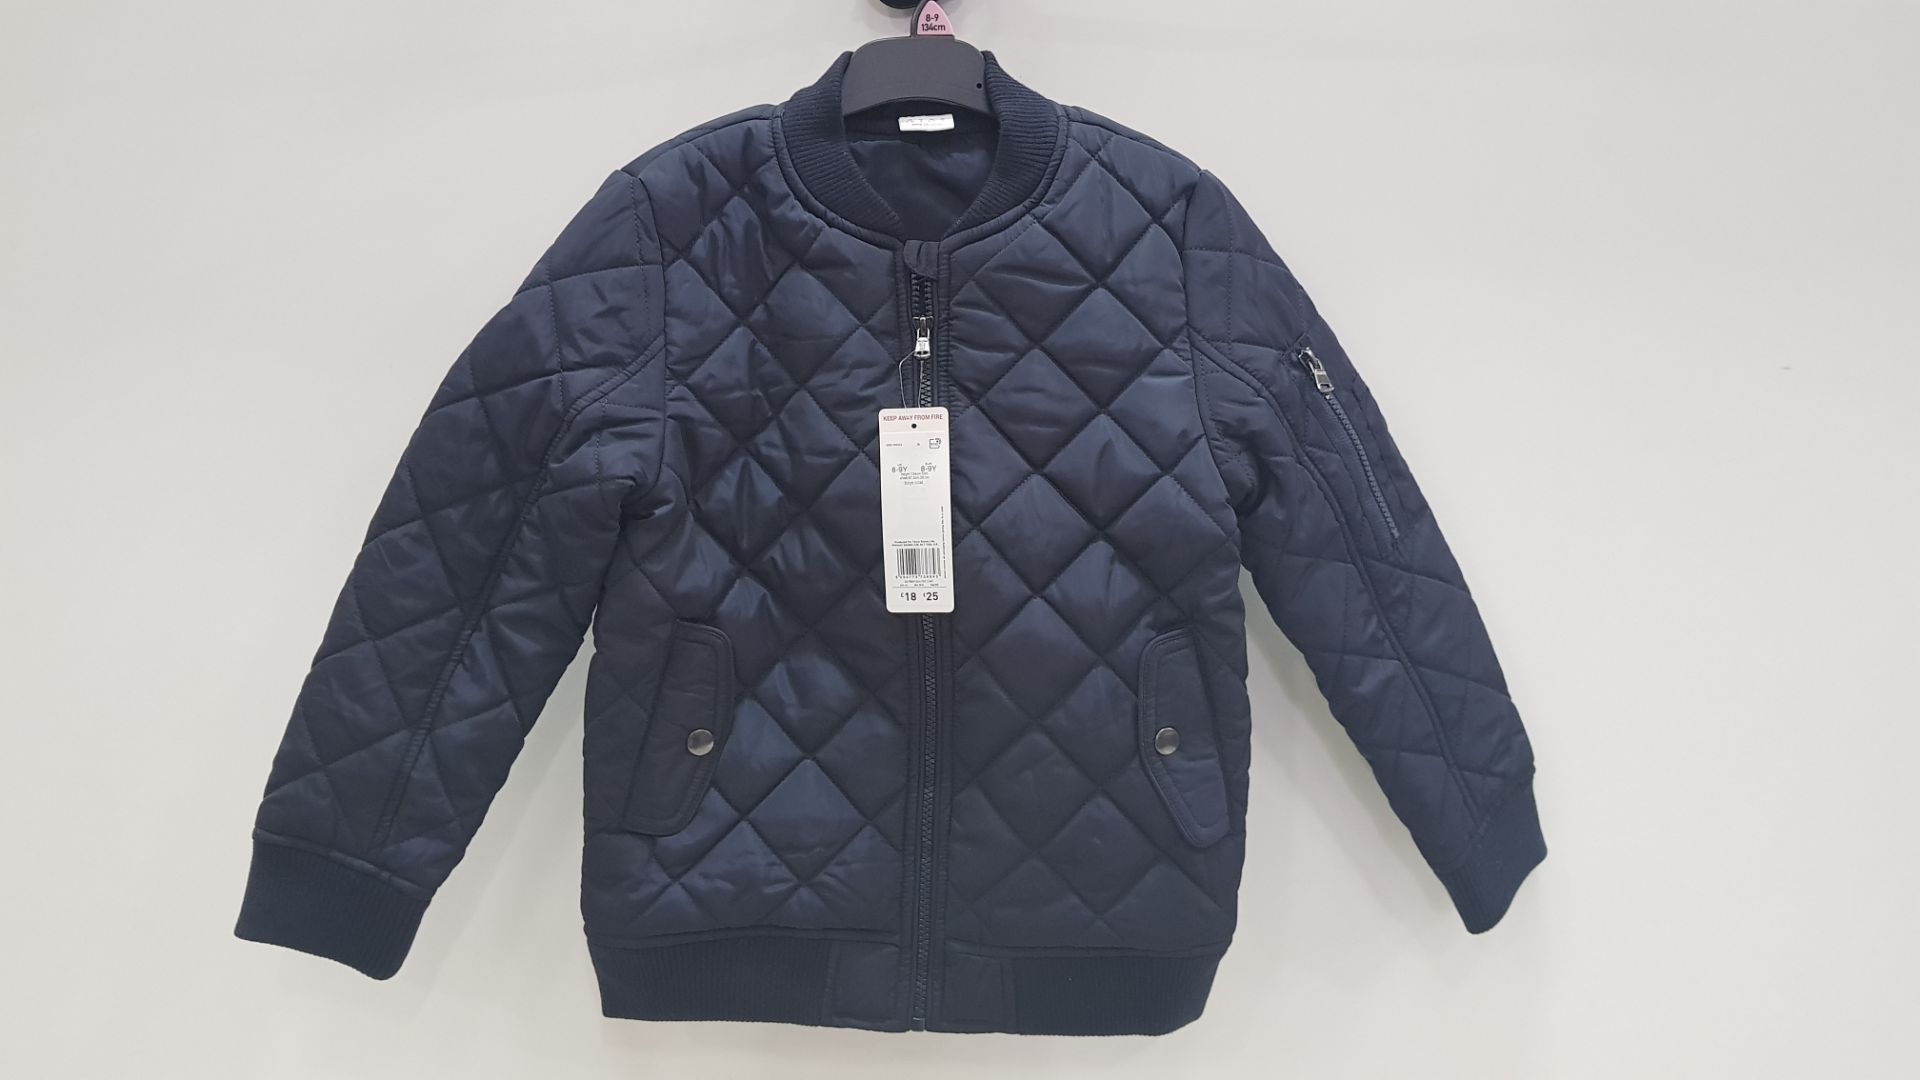 20 X BRAND NEW F&F KIDS COLLECTION NAVY ZIP UP COATS SIZE 8-9 YEARS RRP £!8.00 (TOTAL RRP £360.00)